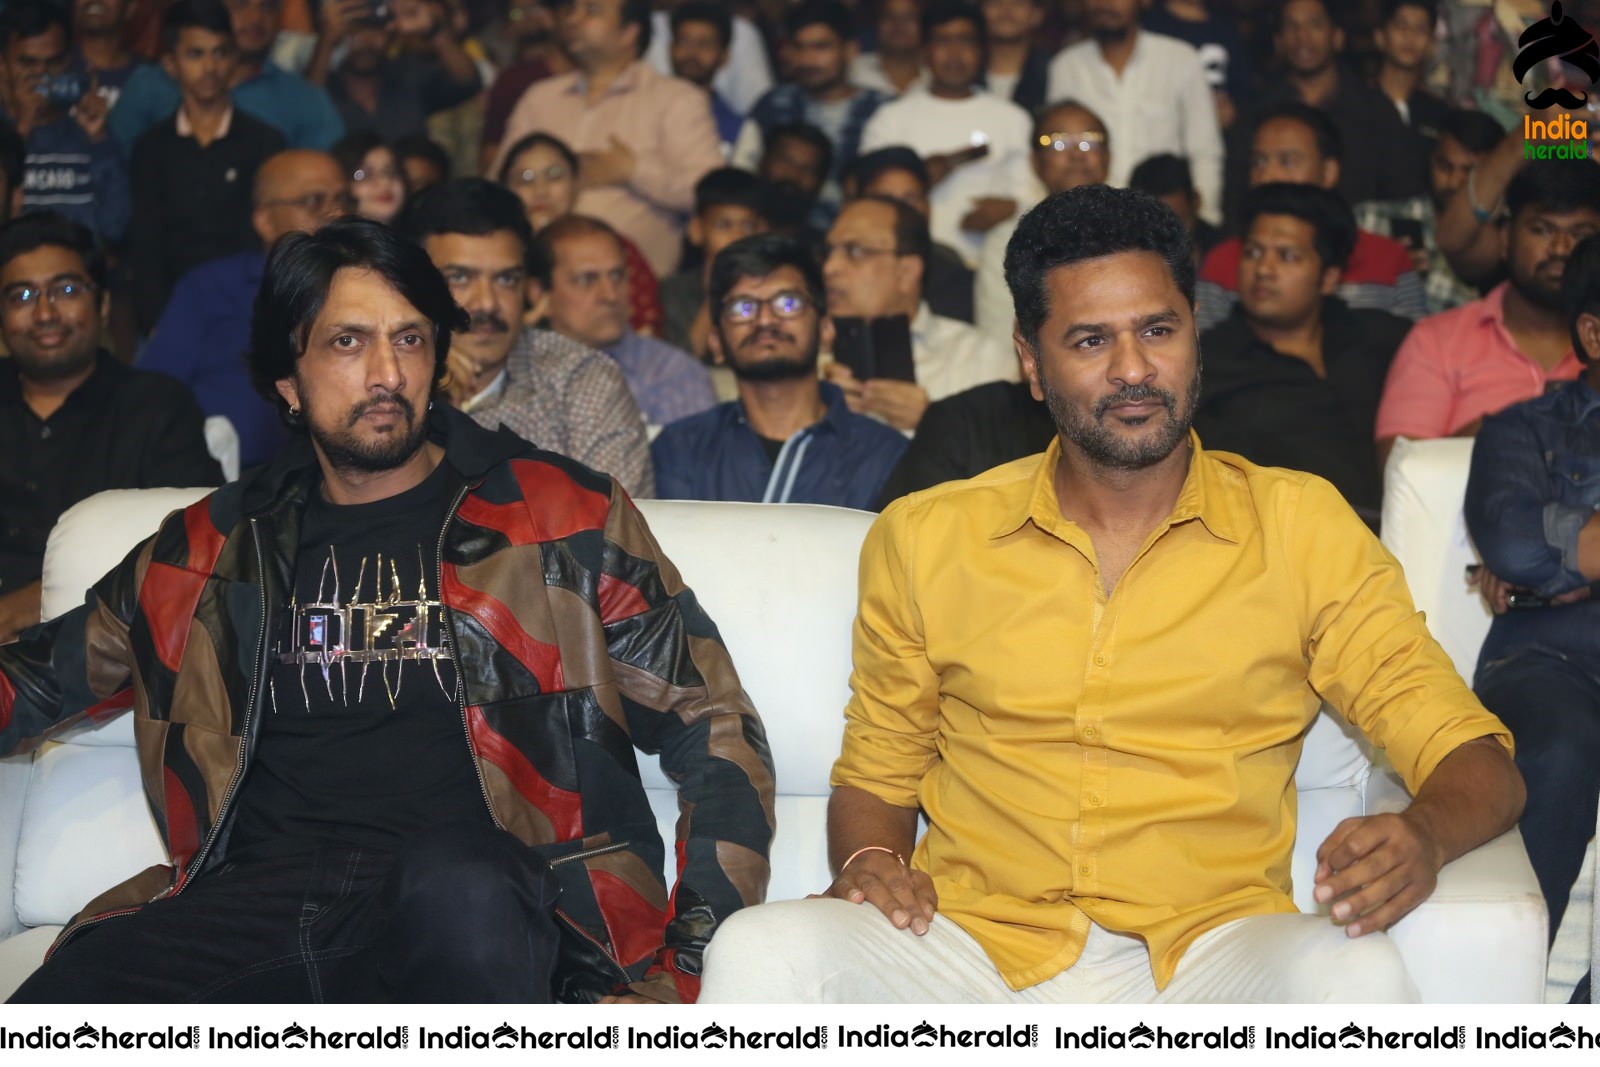 Actor Sudeep and Director Prabhu Deva have a Chit Chat